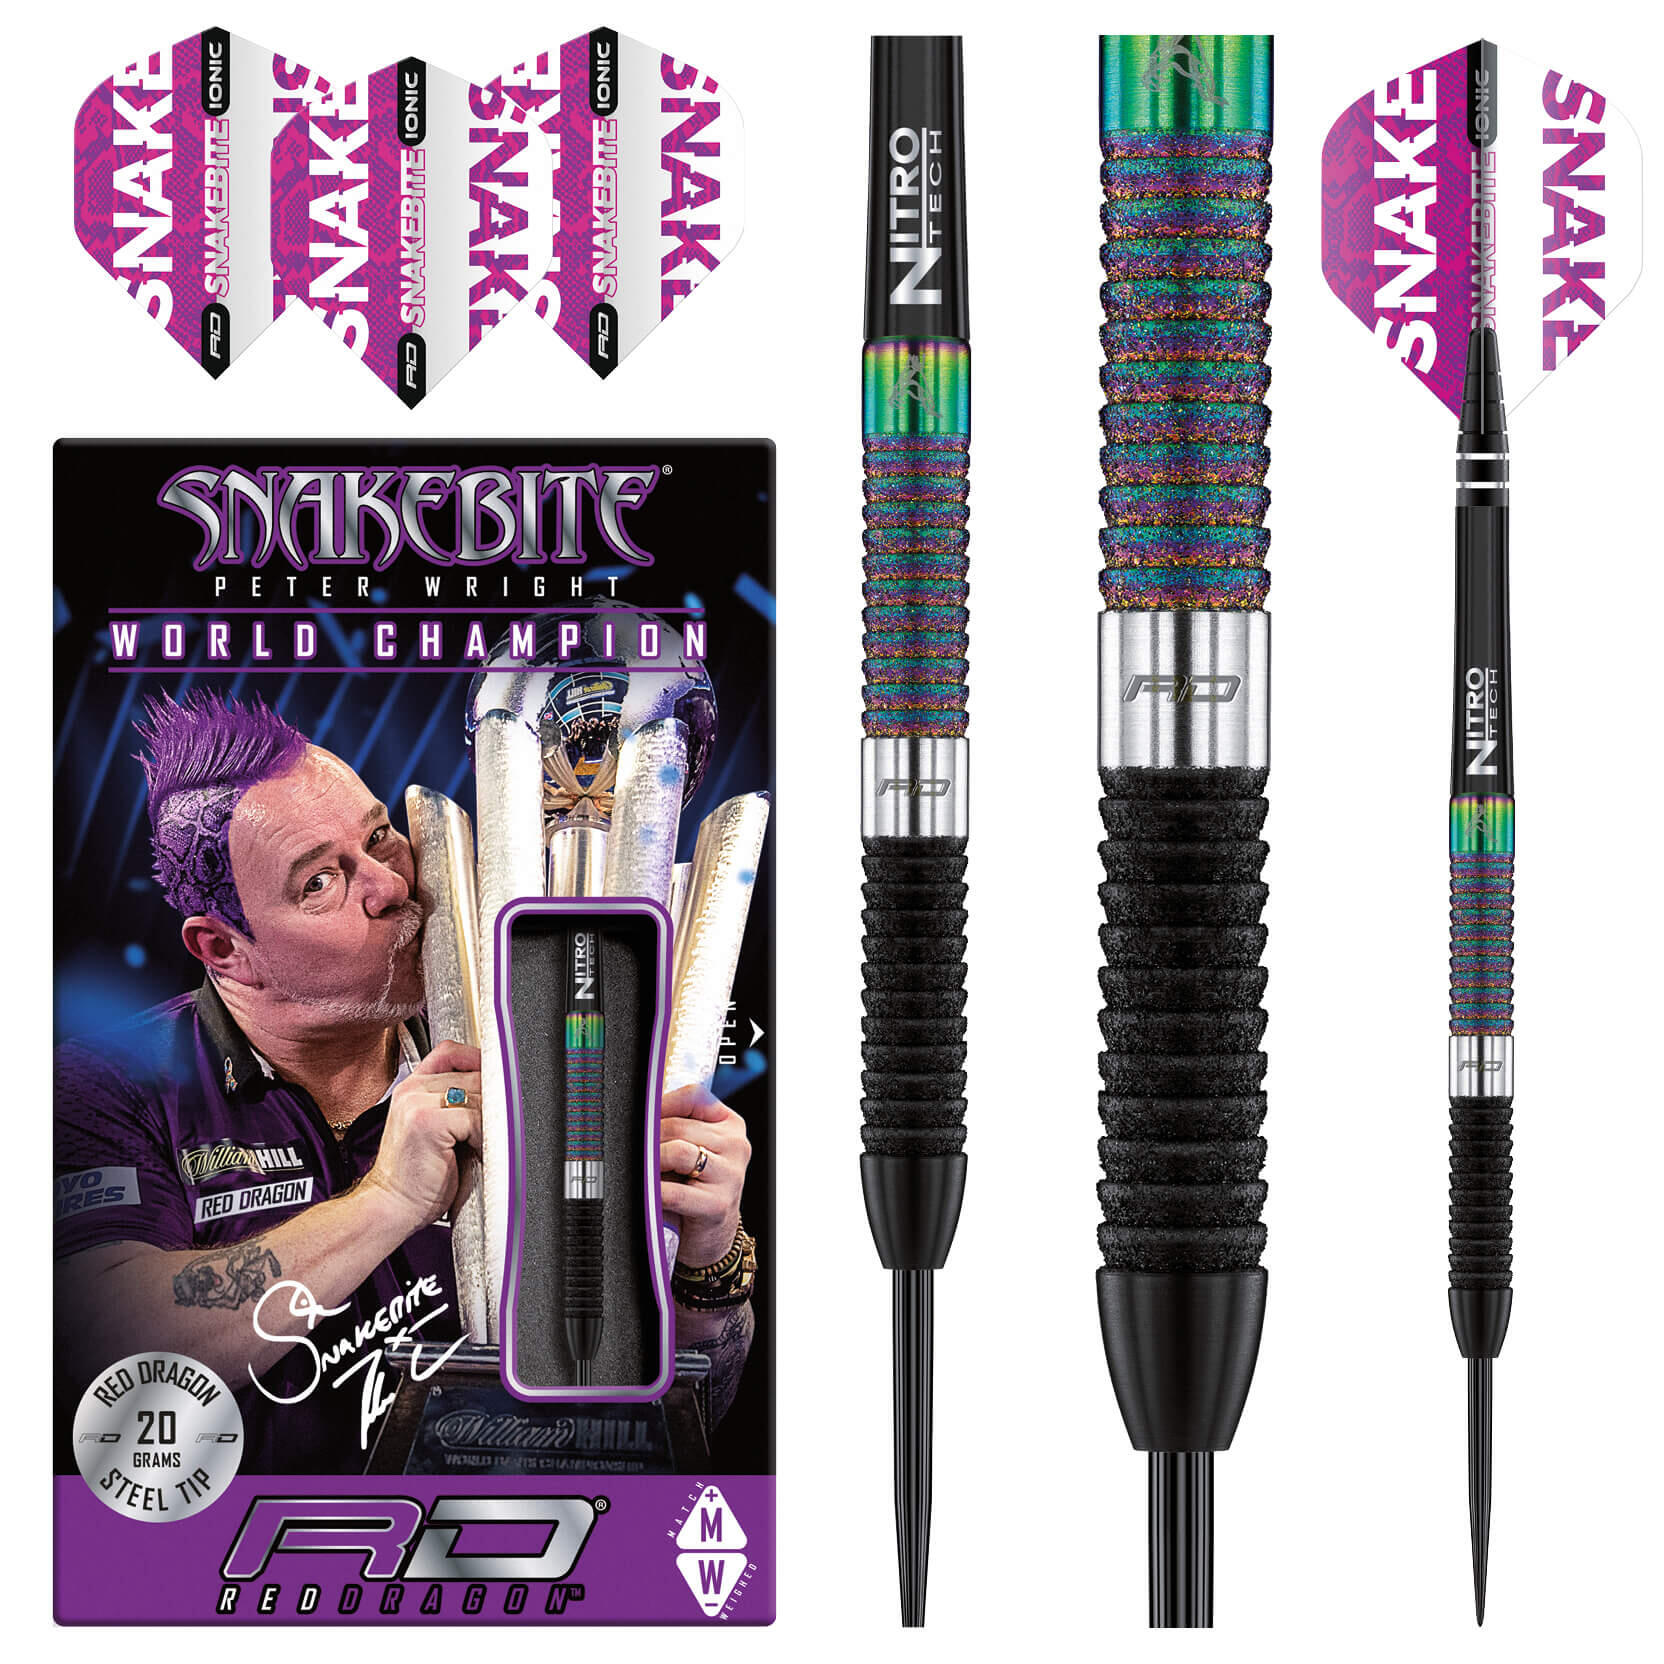 RED DRAGON DARTS Peter Wright Snakebite WC Diamond SE 20g Darts Set including Flights and Shafts